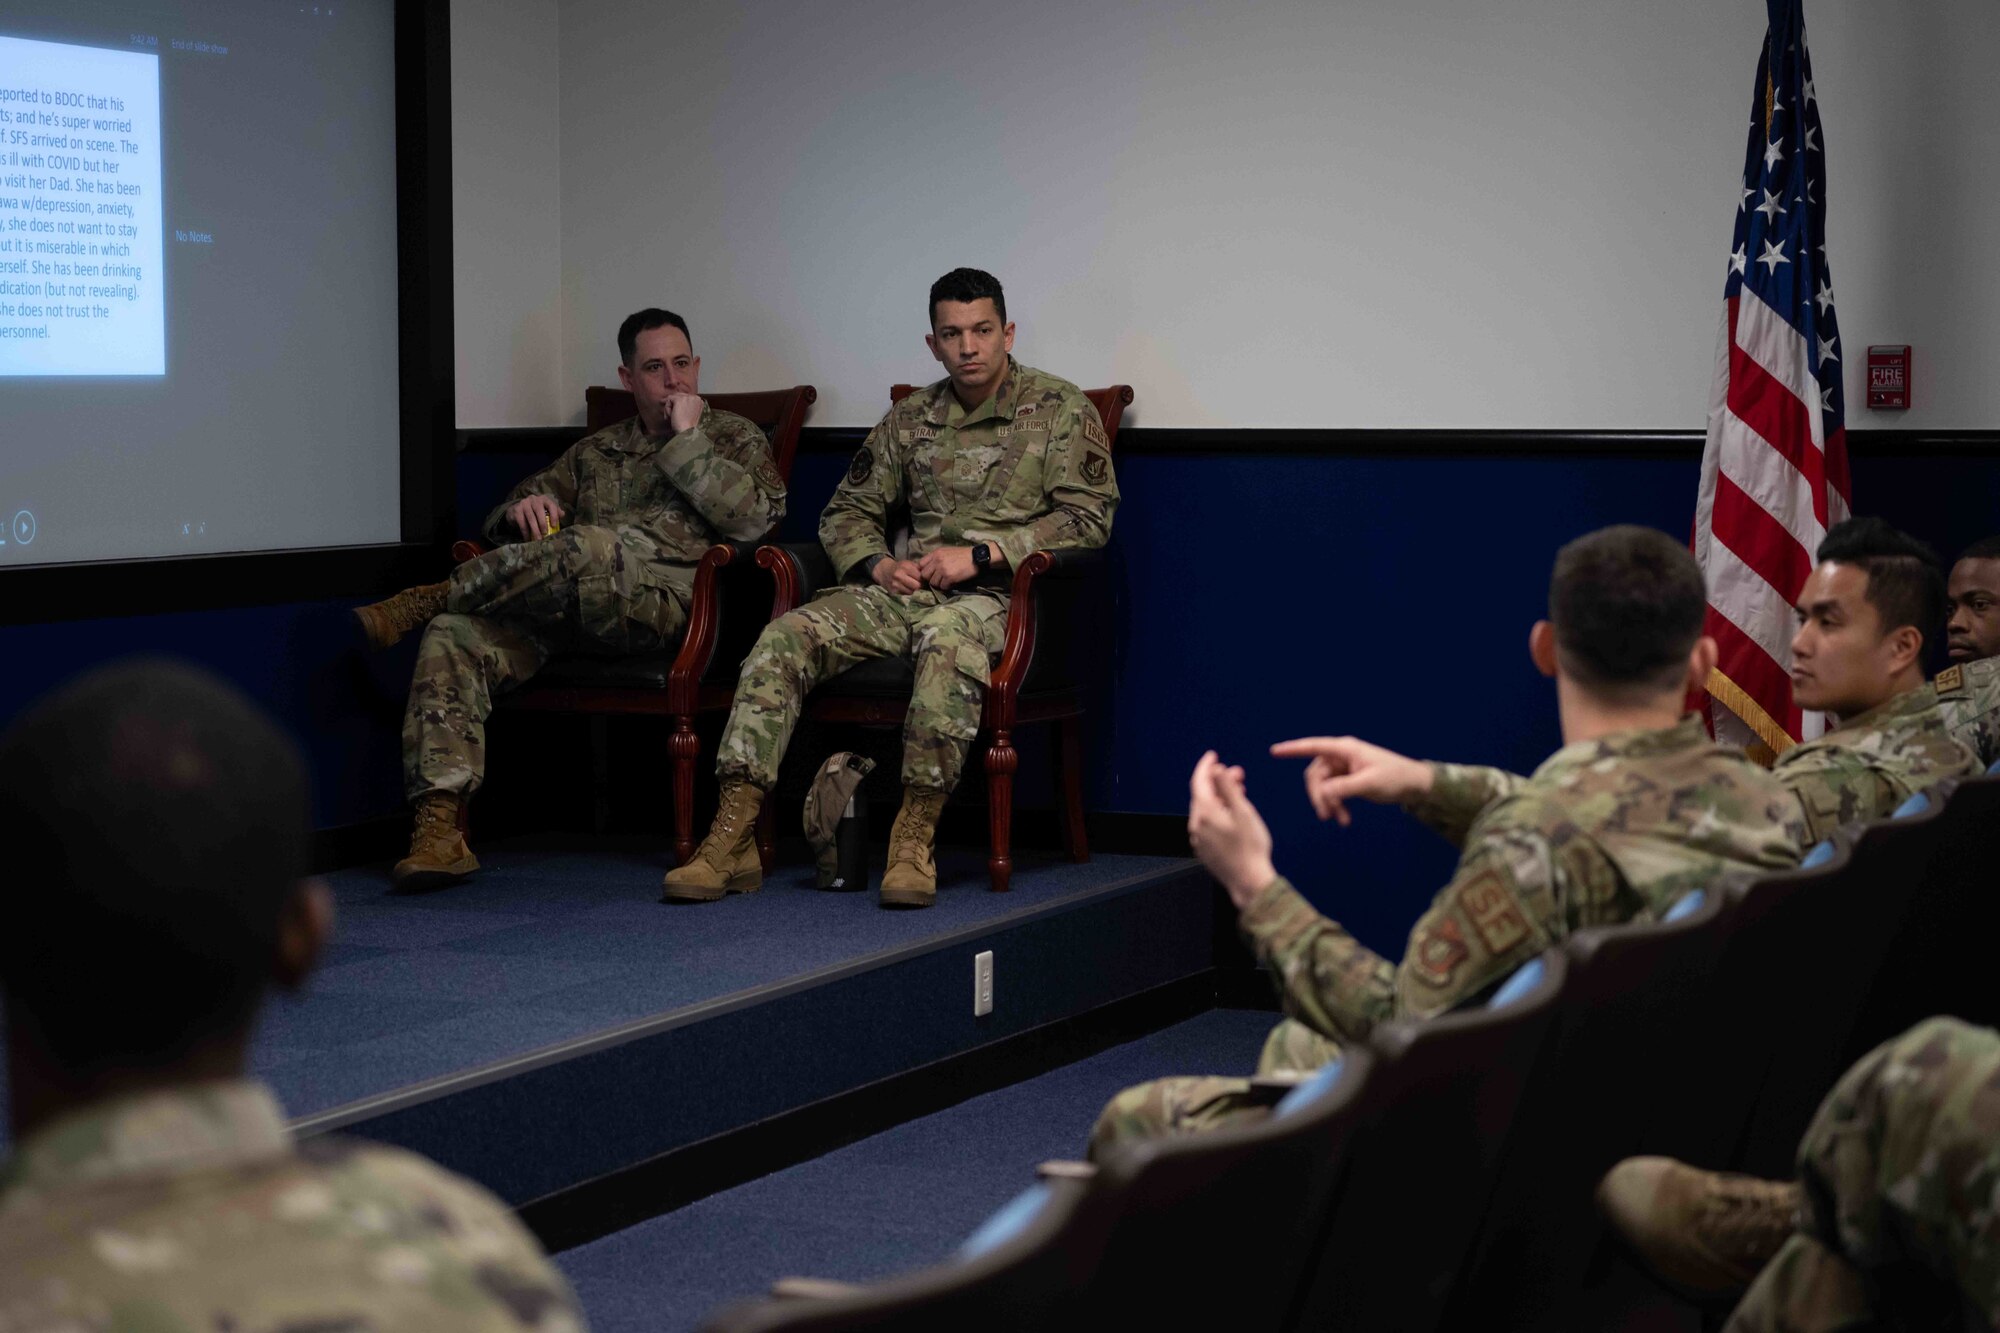 Two military members sit as another explains to a room an experience.